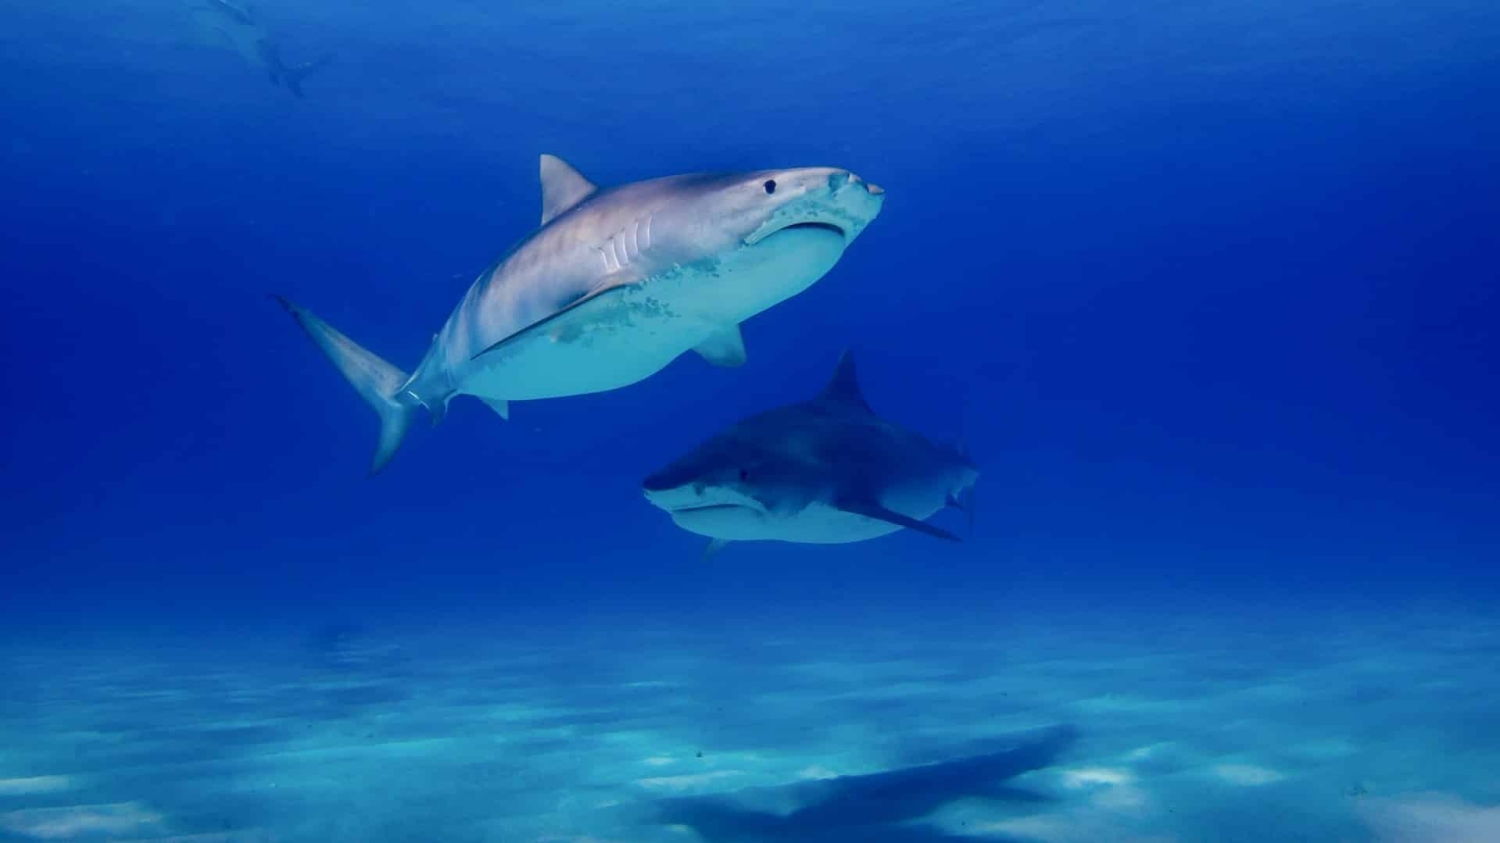 Sharks swimming in the ocean - Positive Youtube Videos Help Deflect Blame From Sharks - College of Natural Resources News NC State University